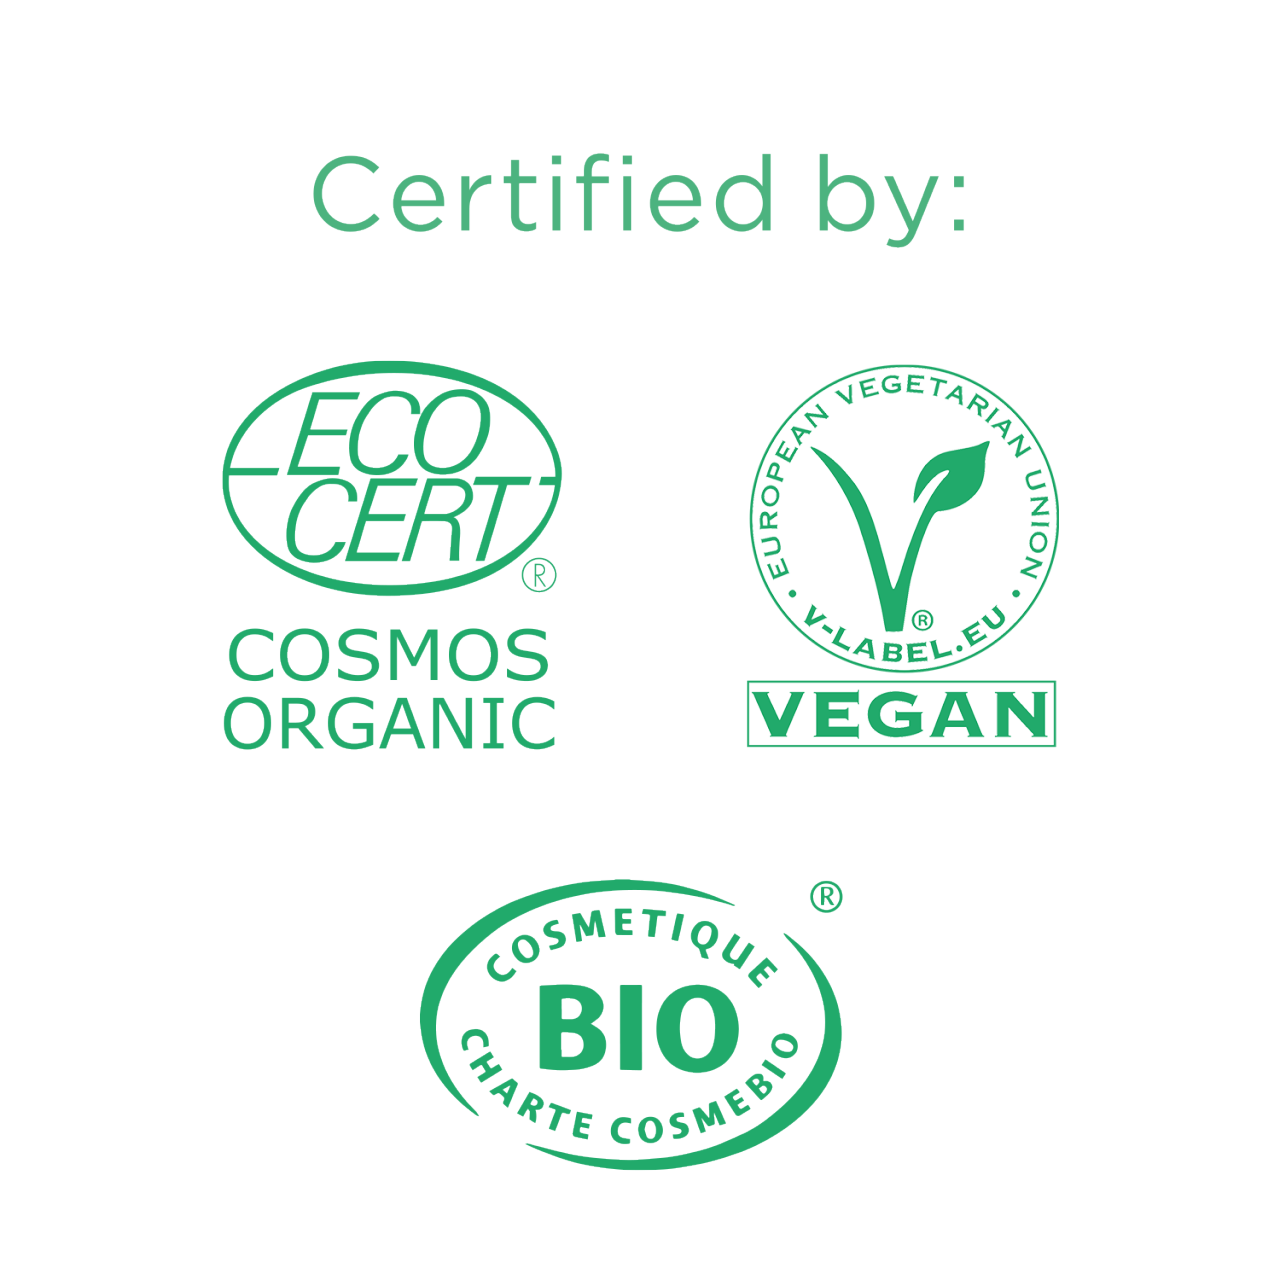 Look out for organic certifications such as: Cosmetique Charte Cosmebio, EcoCert, Vegan European Vegeterian Union